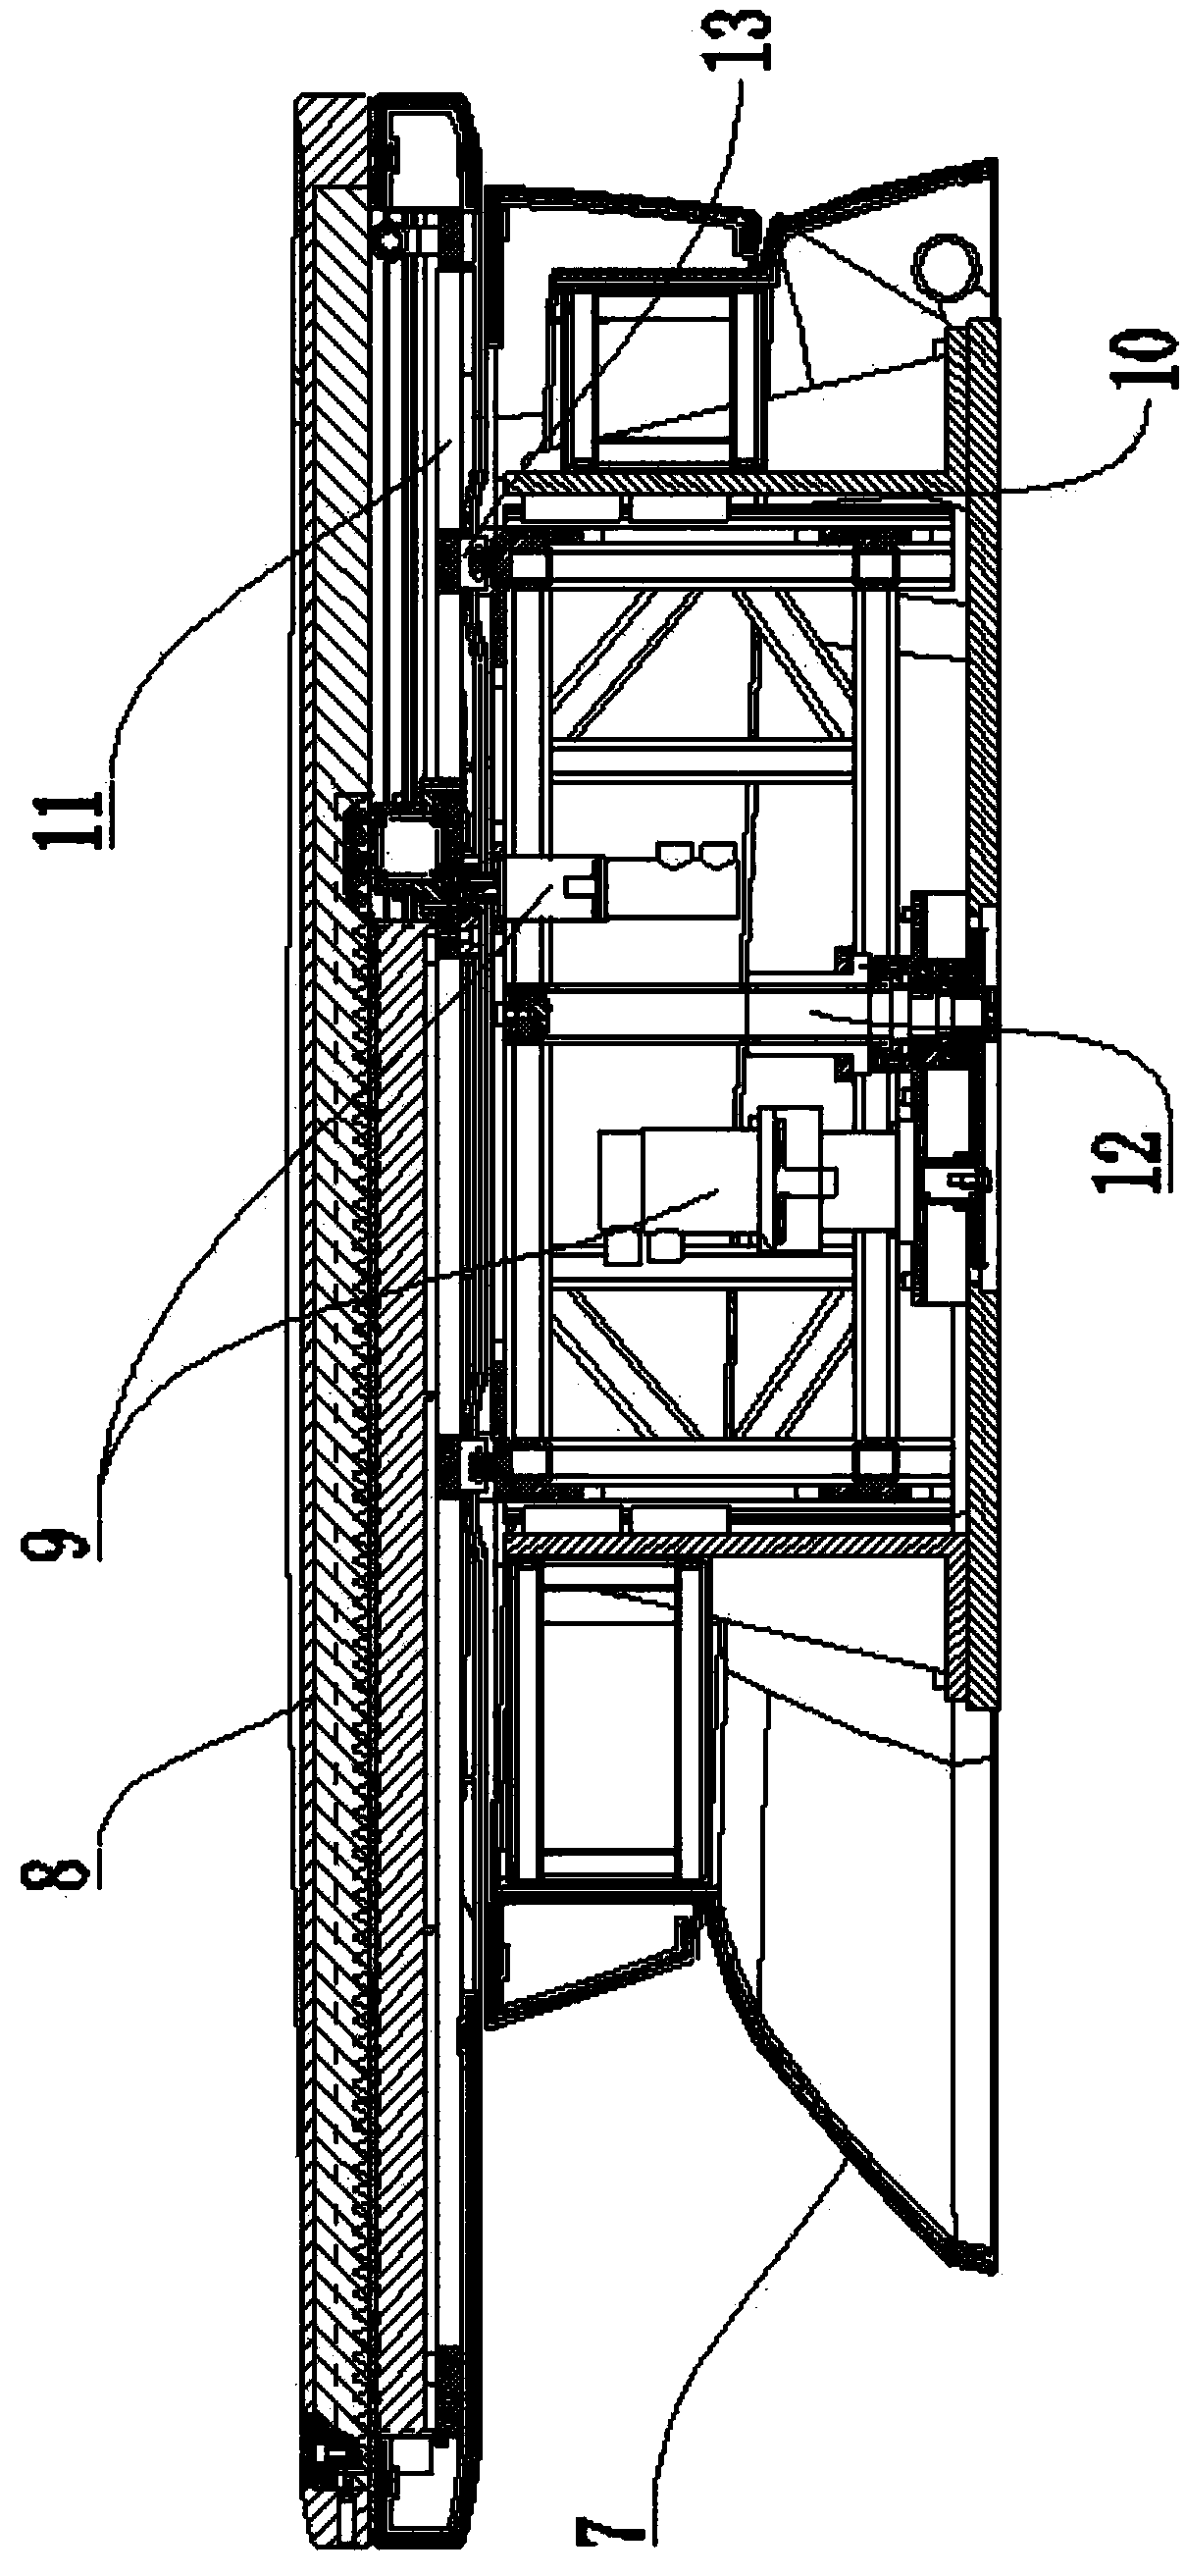 Magnetic induction therapy apparatus